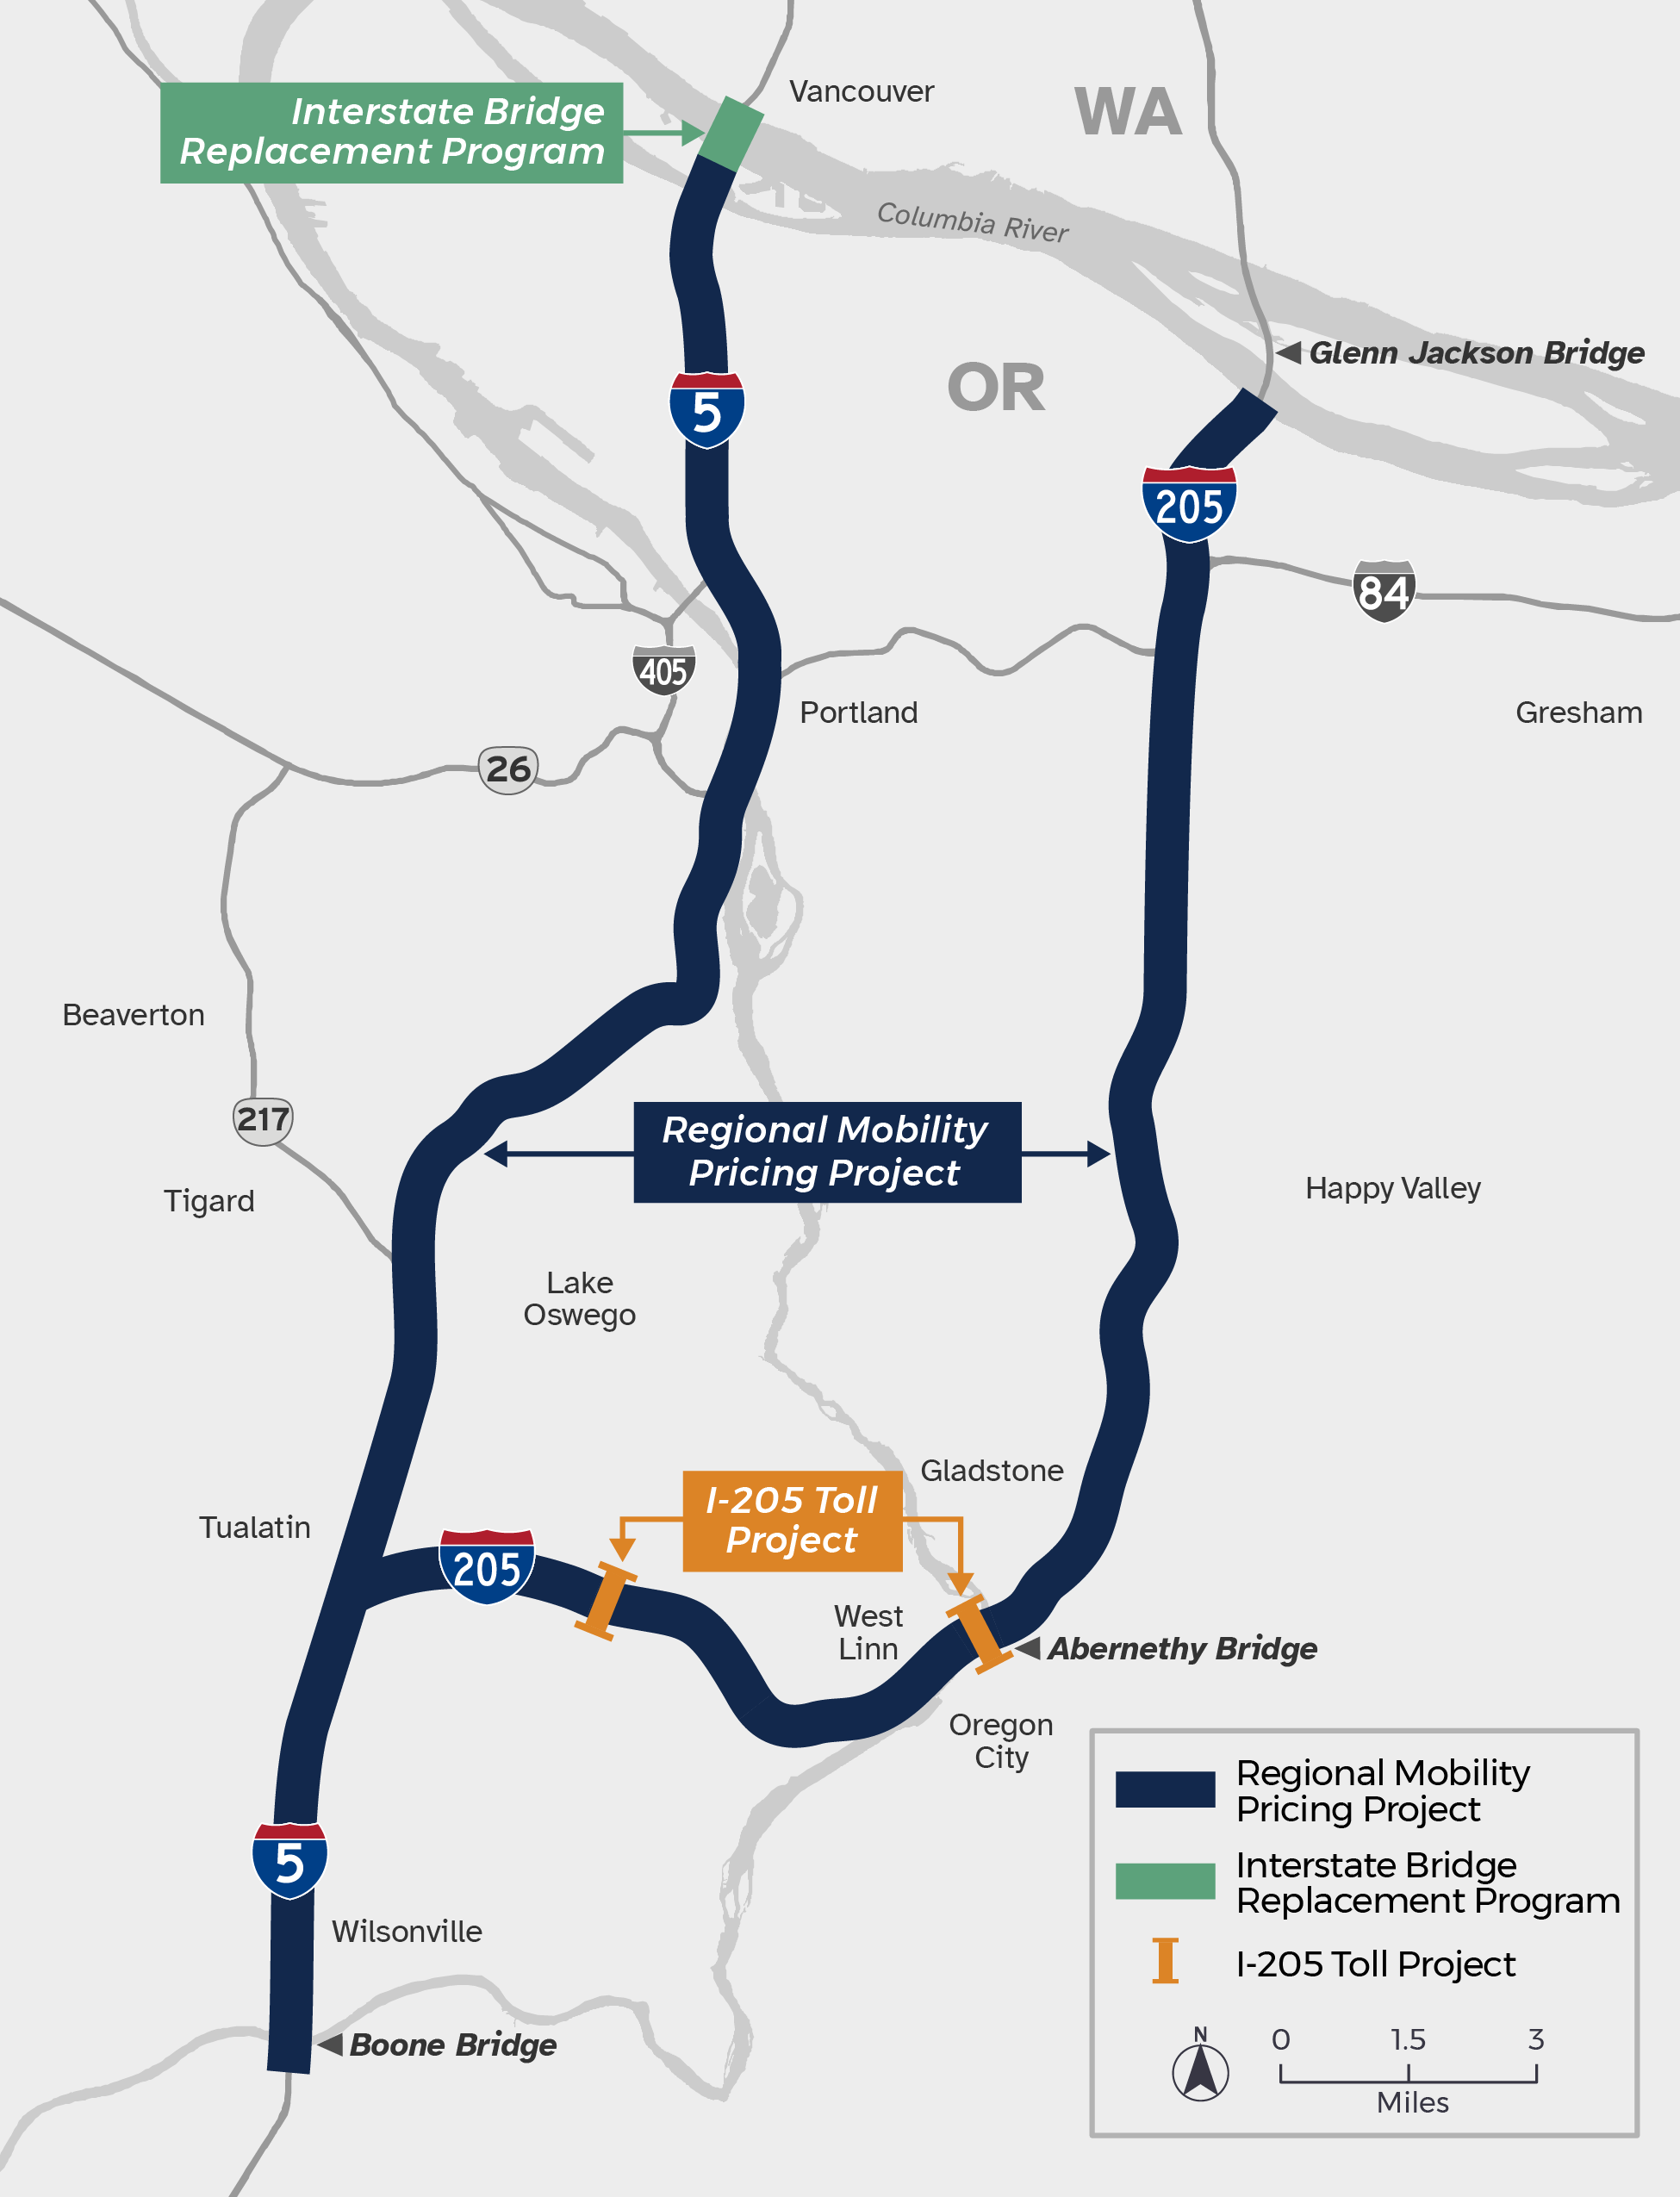 The study area includes I 5 and and two oh 5 from the Oregon Washington state line to the Boone Bridge in Wilsonville.